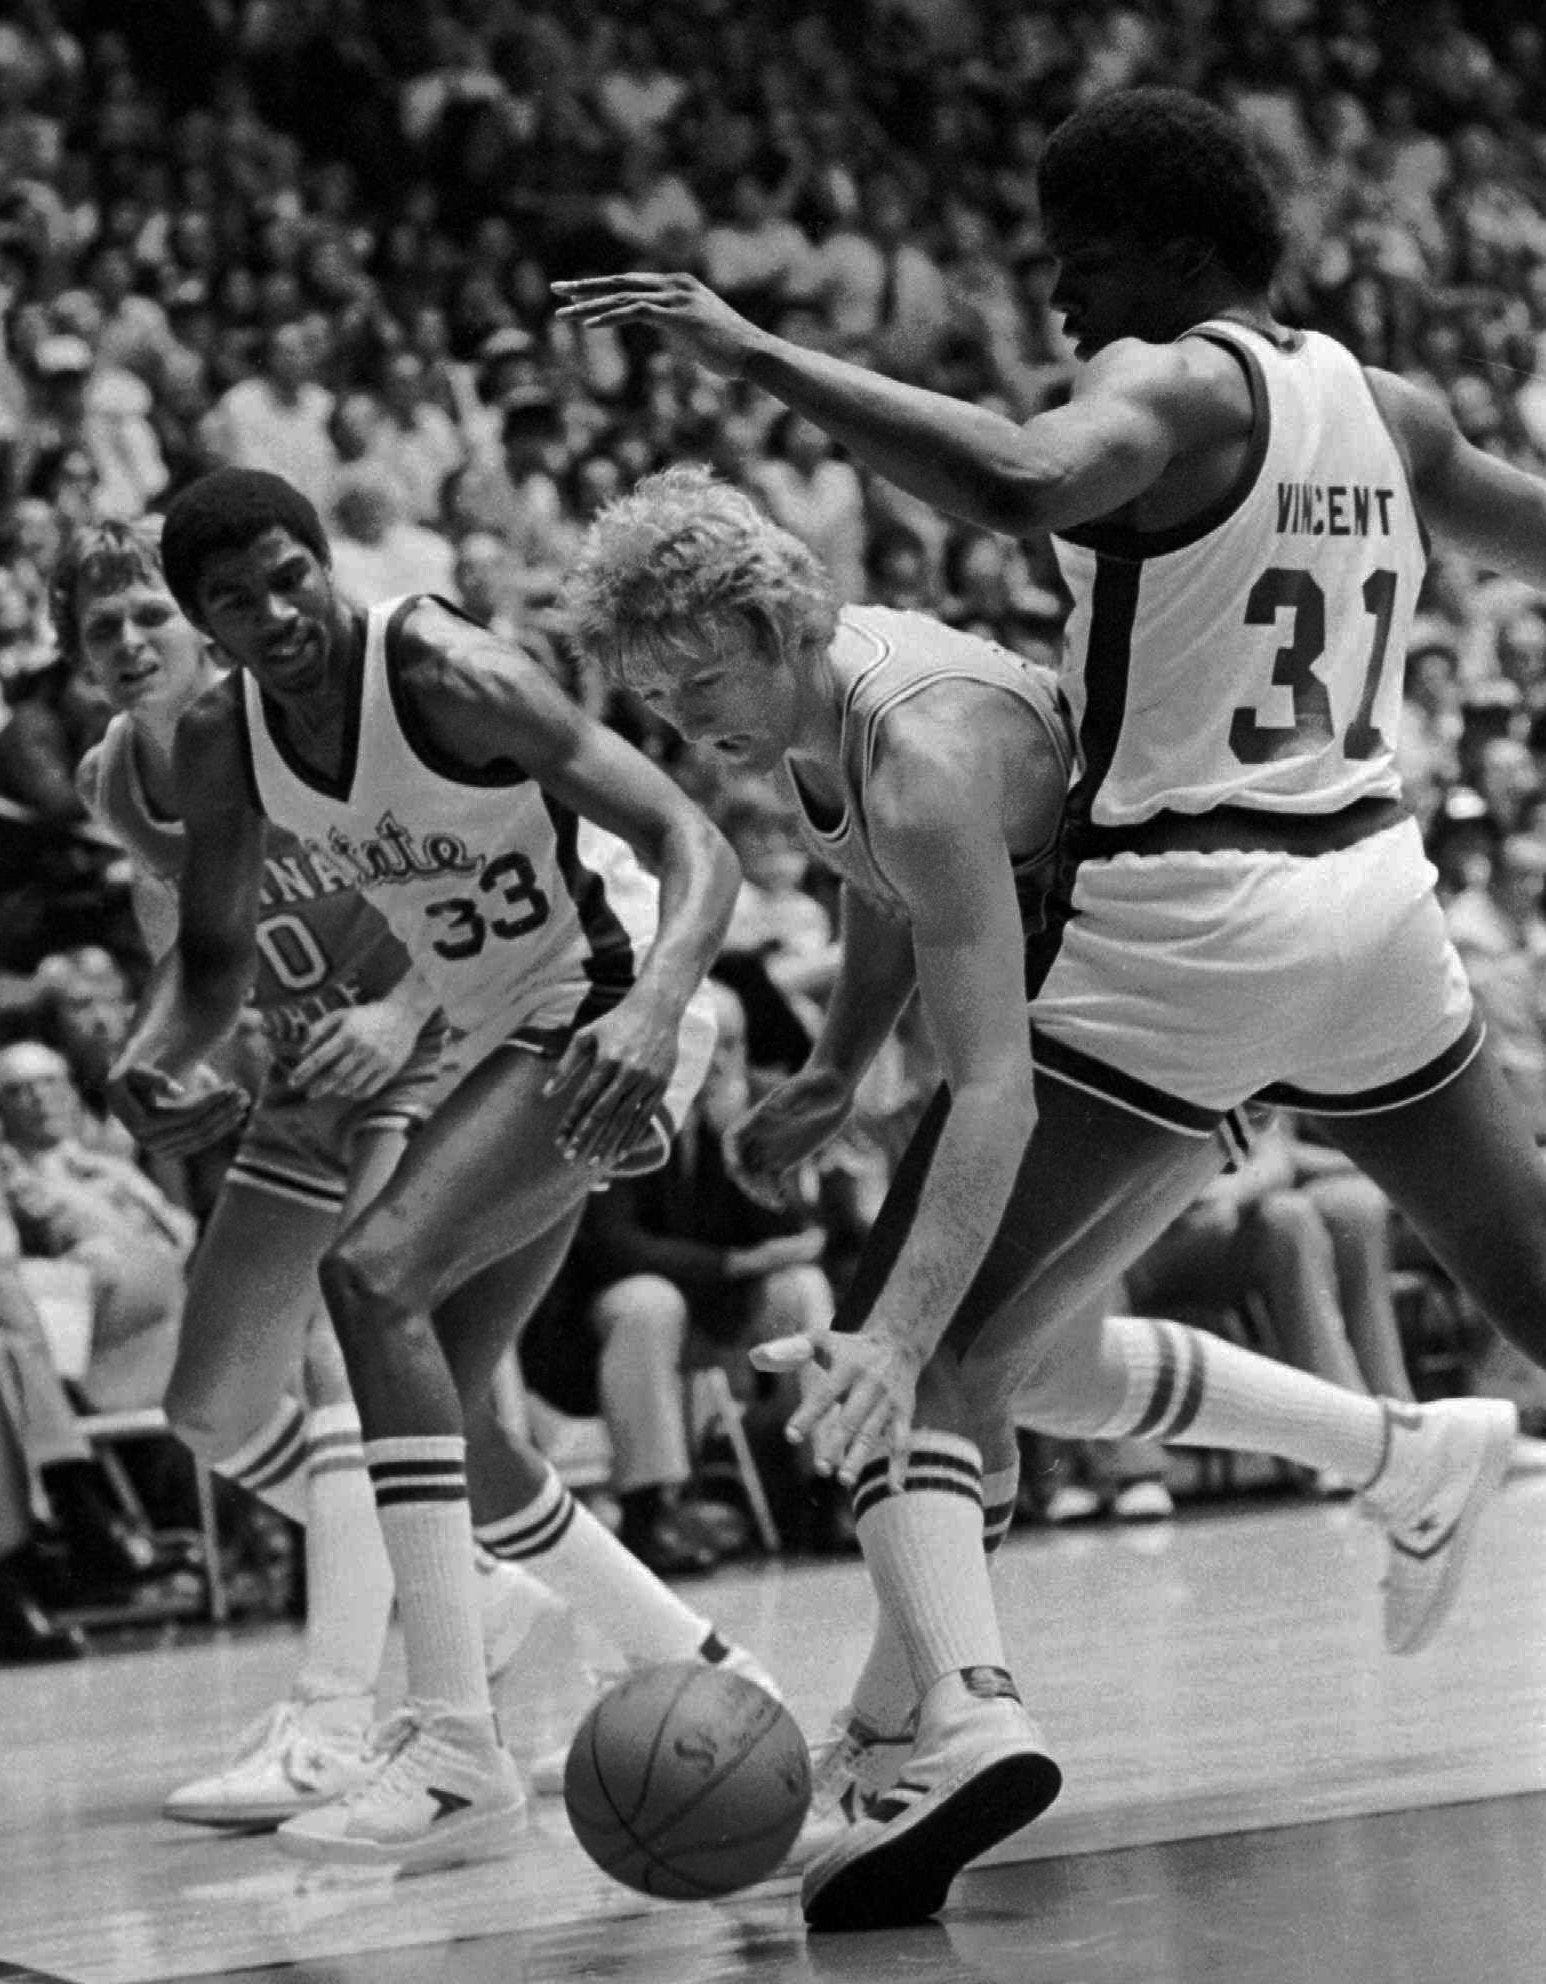 Michigan State's Jay Vincent (31) and Earvin Johnson apply pressure as Indiana State's Larry Bird looks for help during their NCAA championship game in 1979.